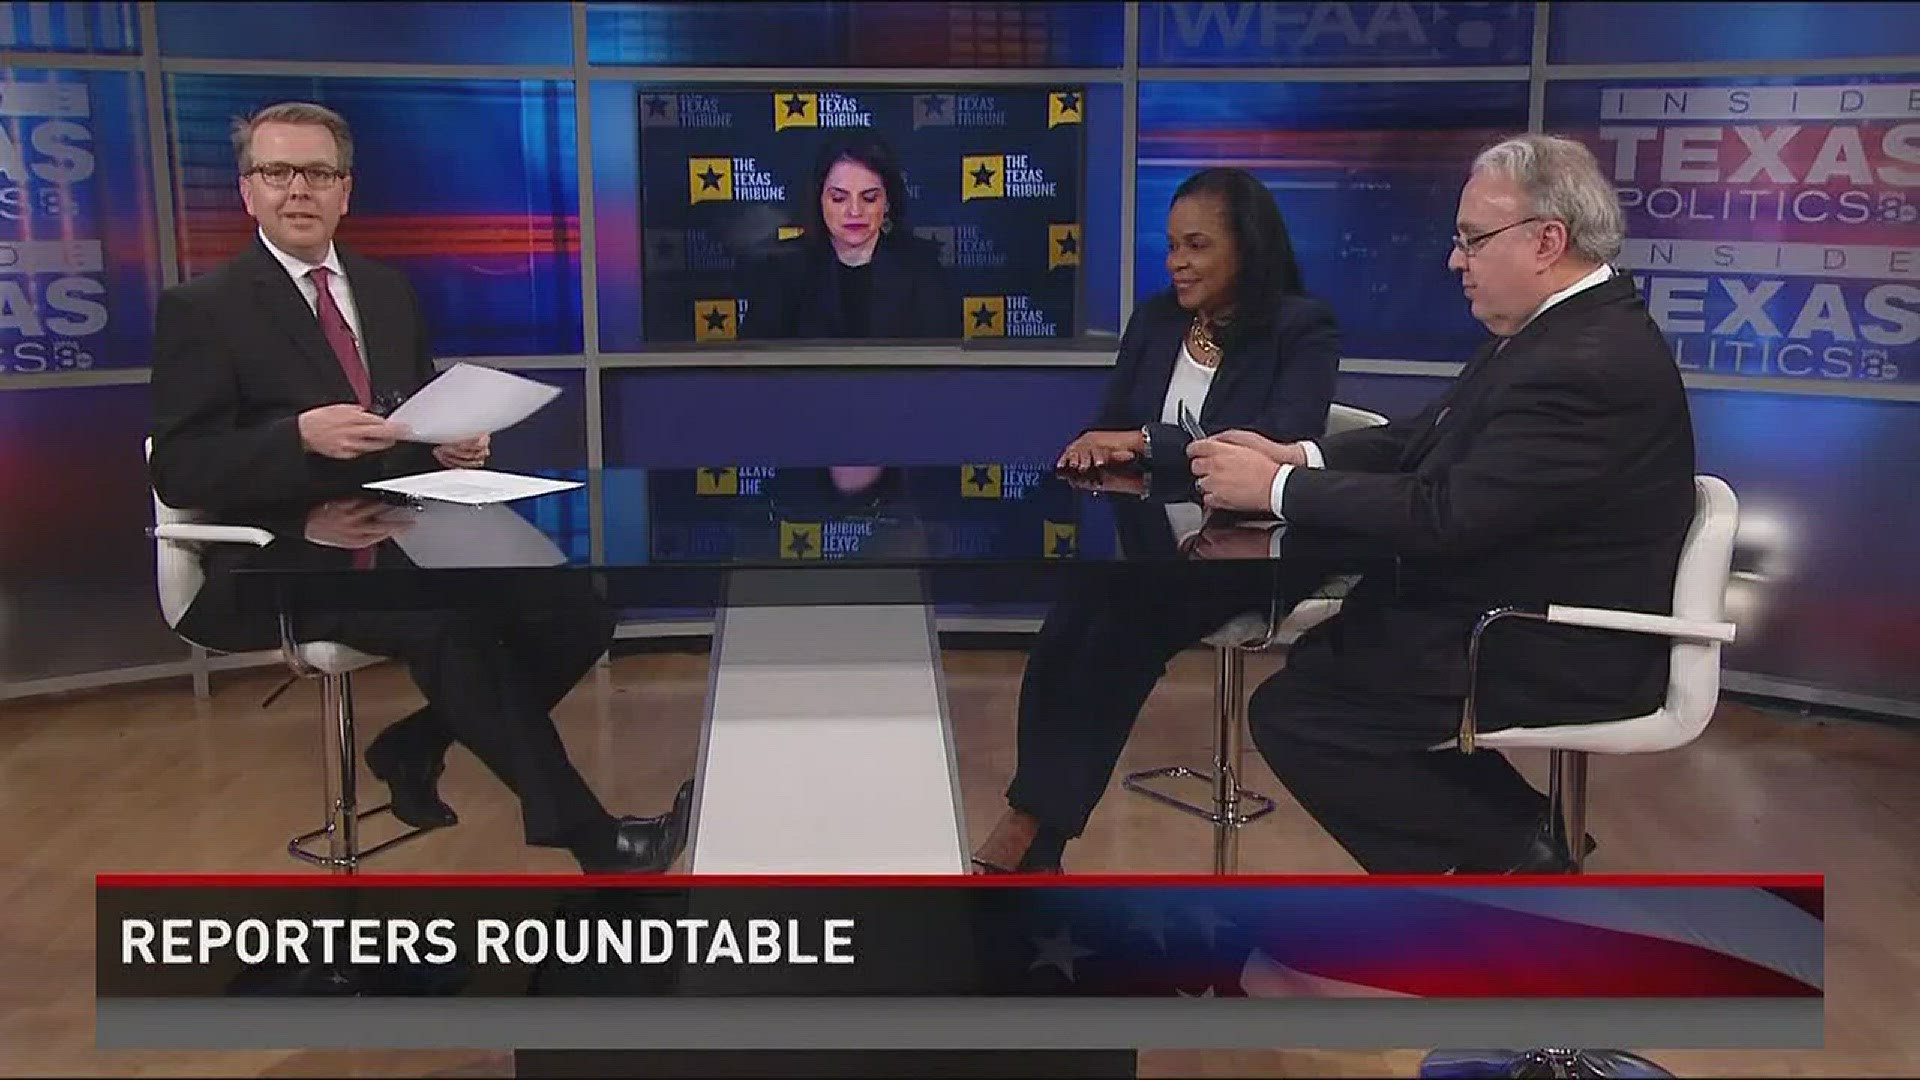 Reporters Roundtable puts the headlines in perspective each week. Bud and Ross returned along with Berna Dean Steptoe, WFAA's political producer. They discussed Texas comptroller Glenn Hegar's warning to legislators that the state's credit rating could b